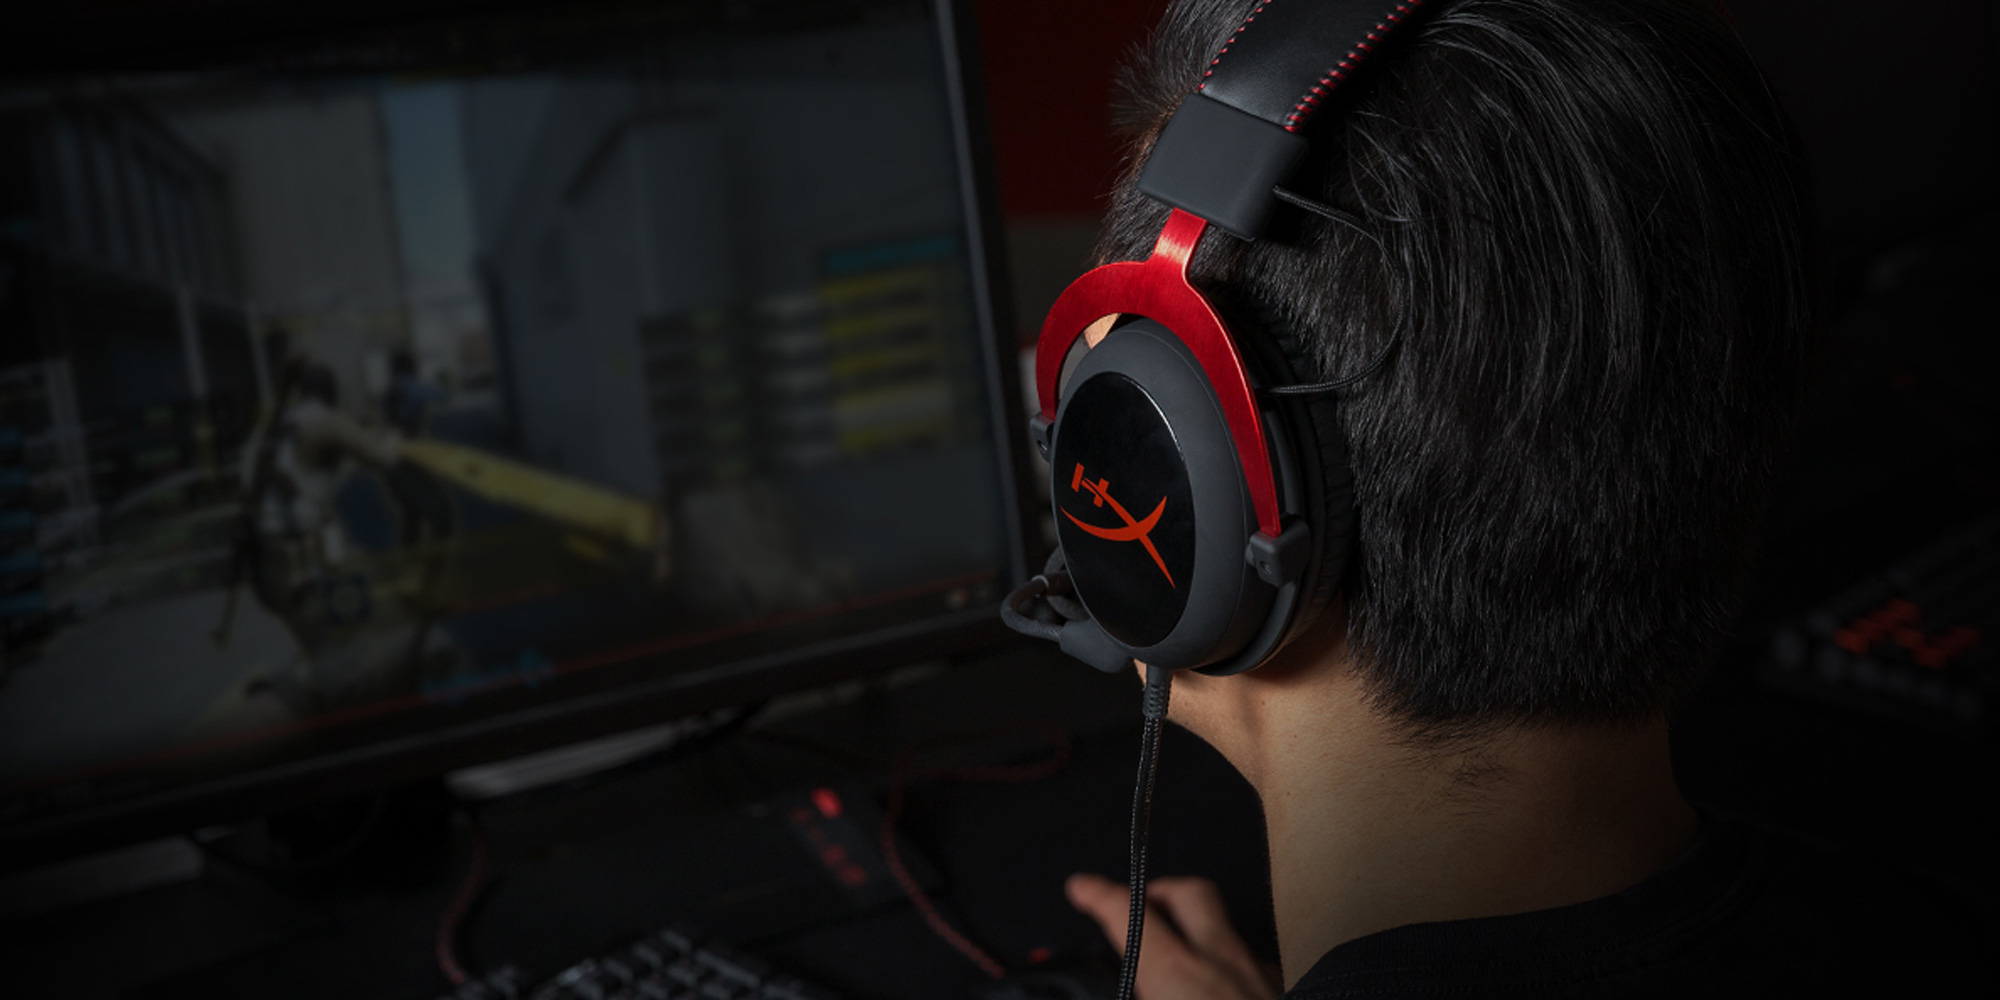 Hyperx S 70 Cloud Ii Pro Gaming Headset Offers 7 1 Ch Virtual Surround Sound 30 Off 9to5toys